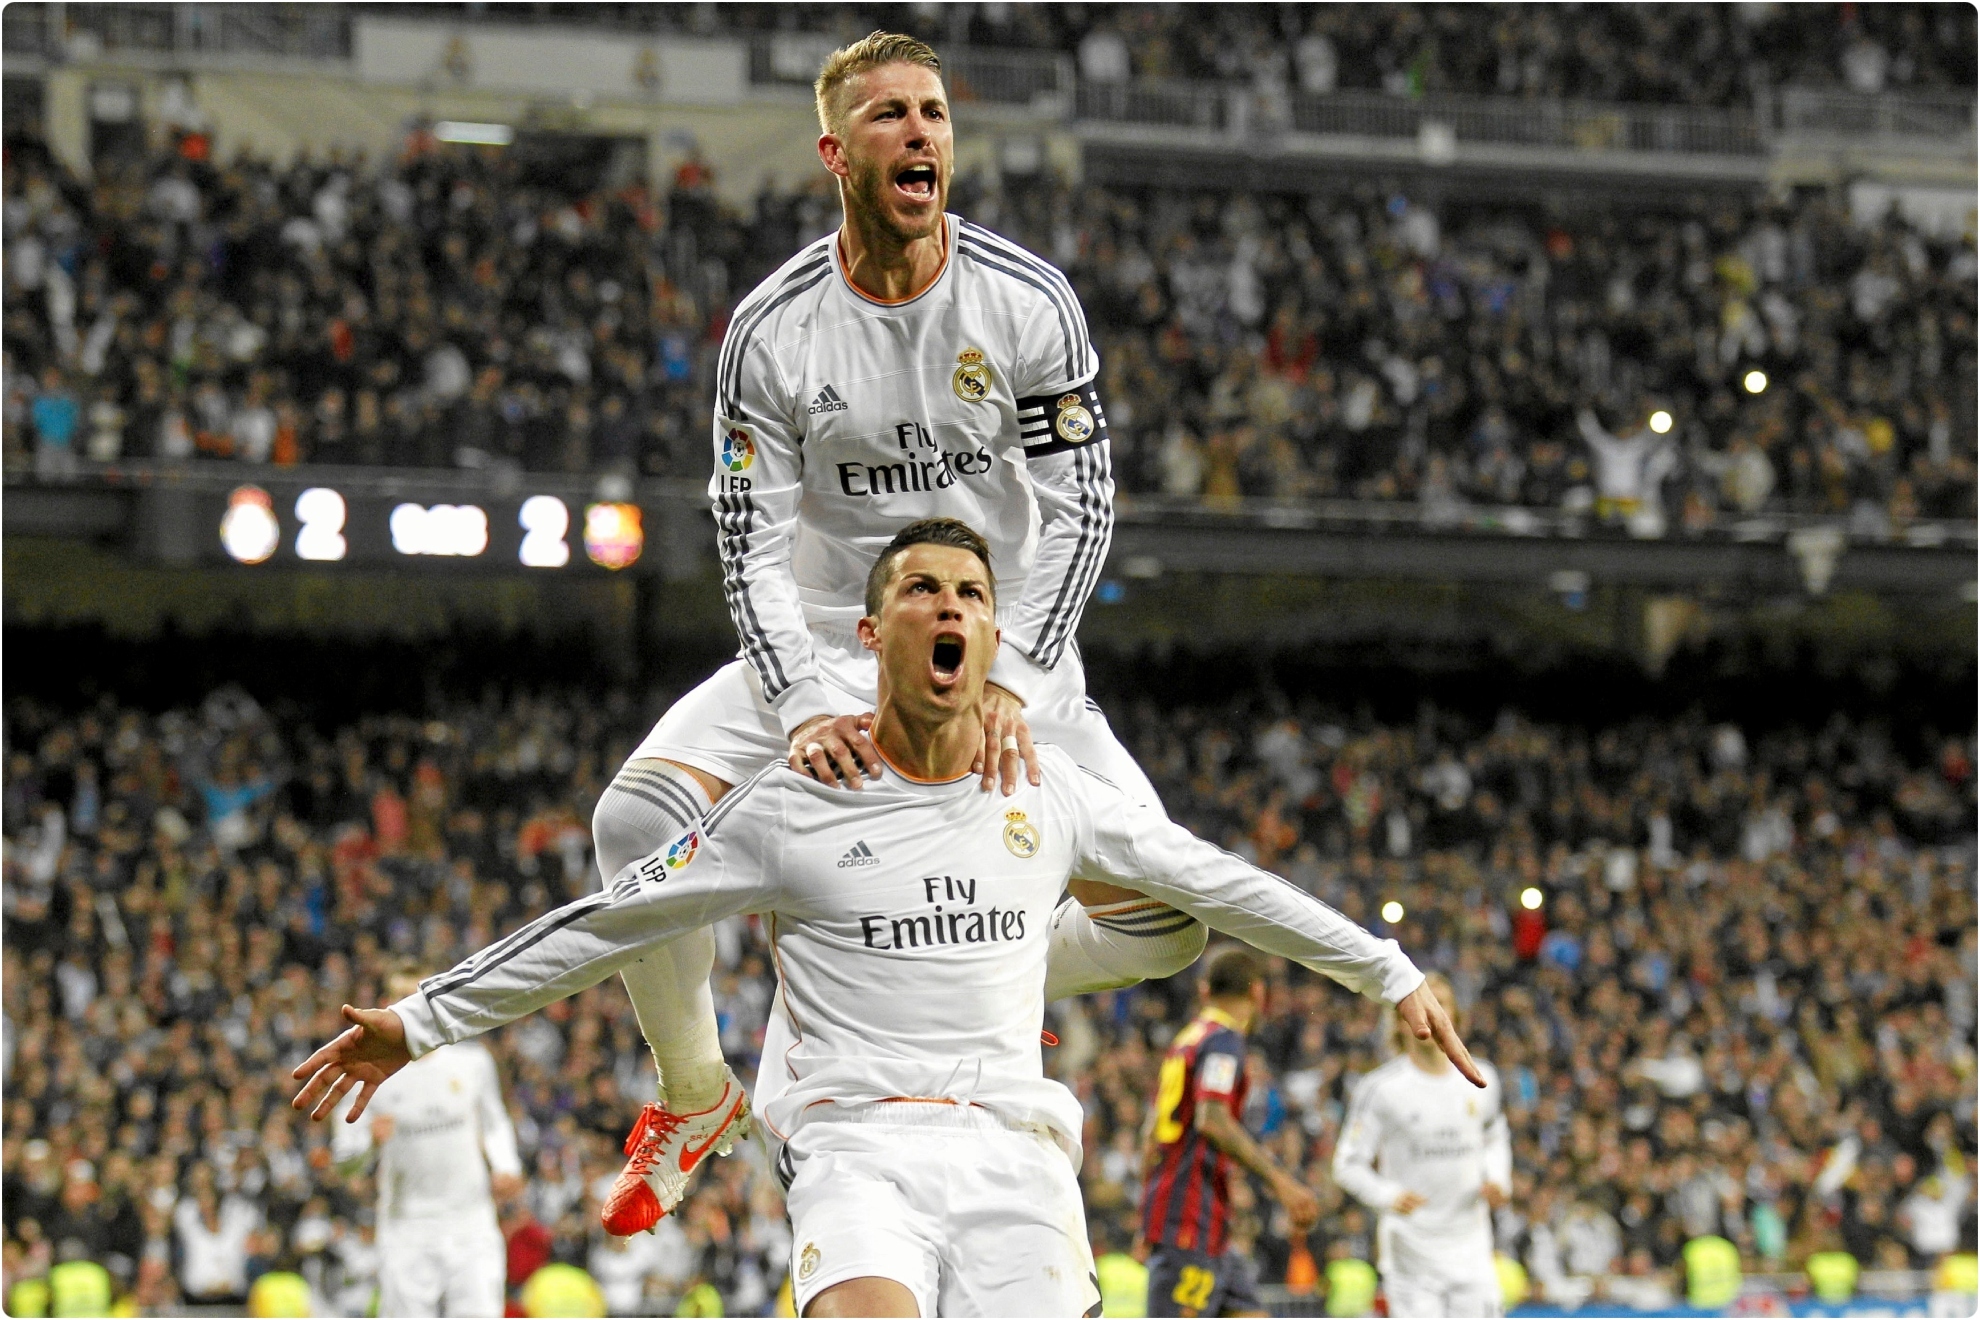 Cristiano and Ramos celebrate together at Real Madrid